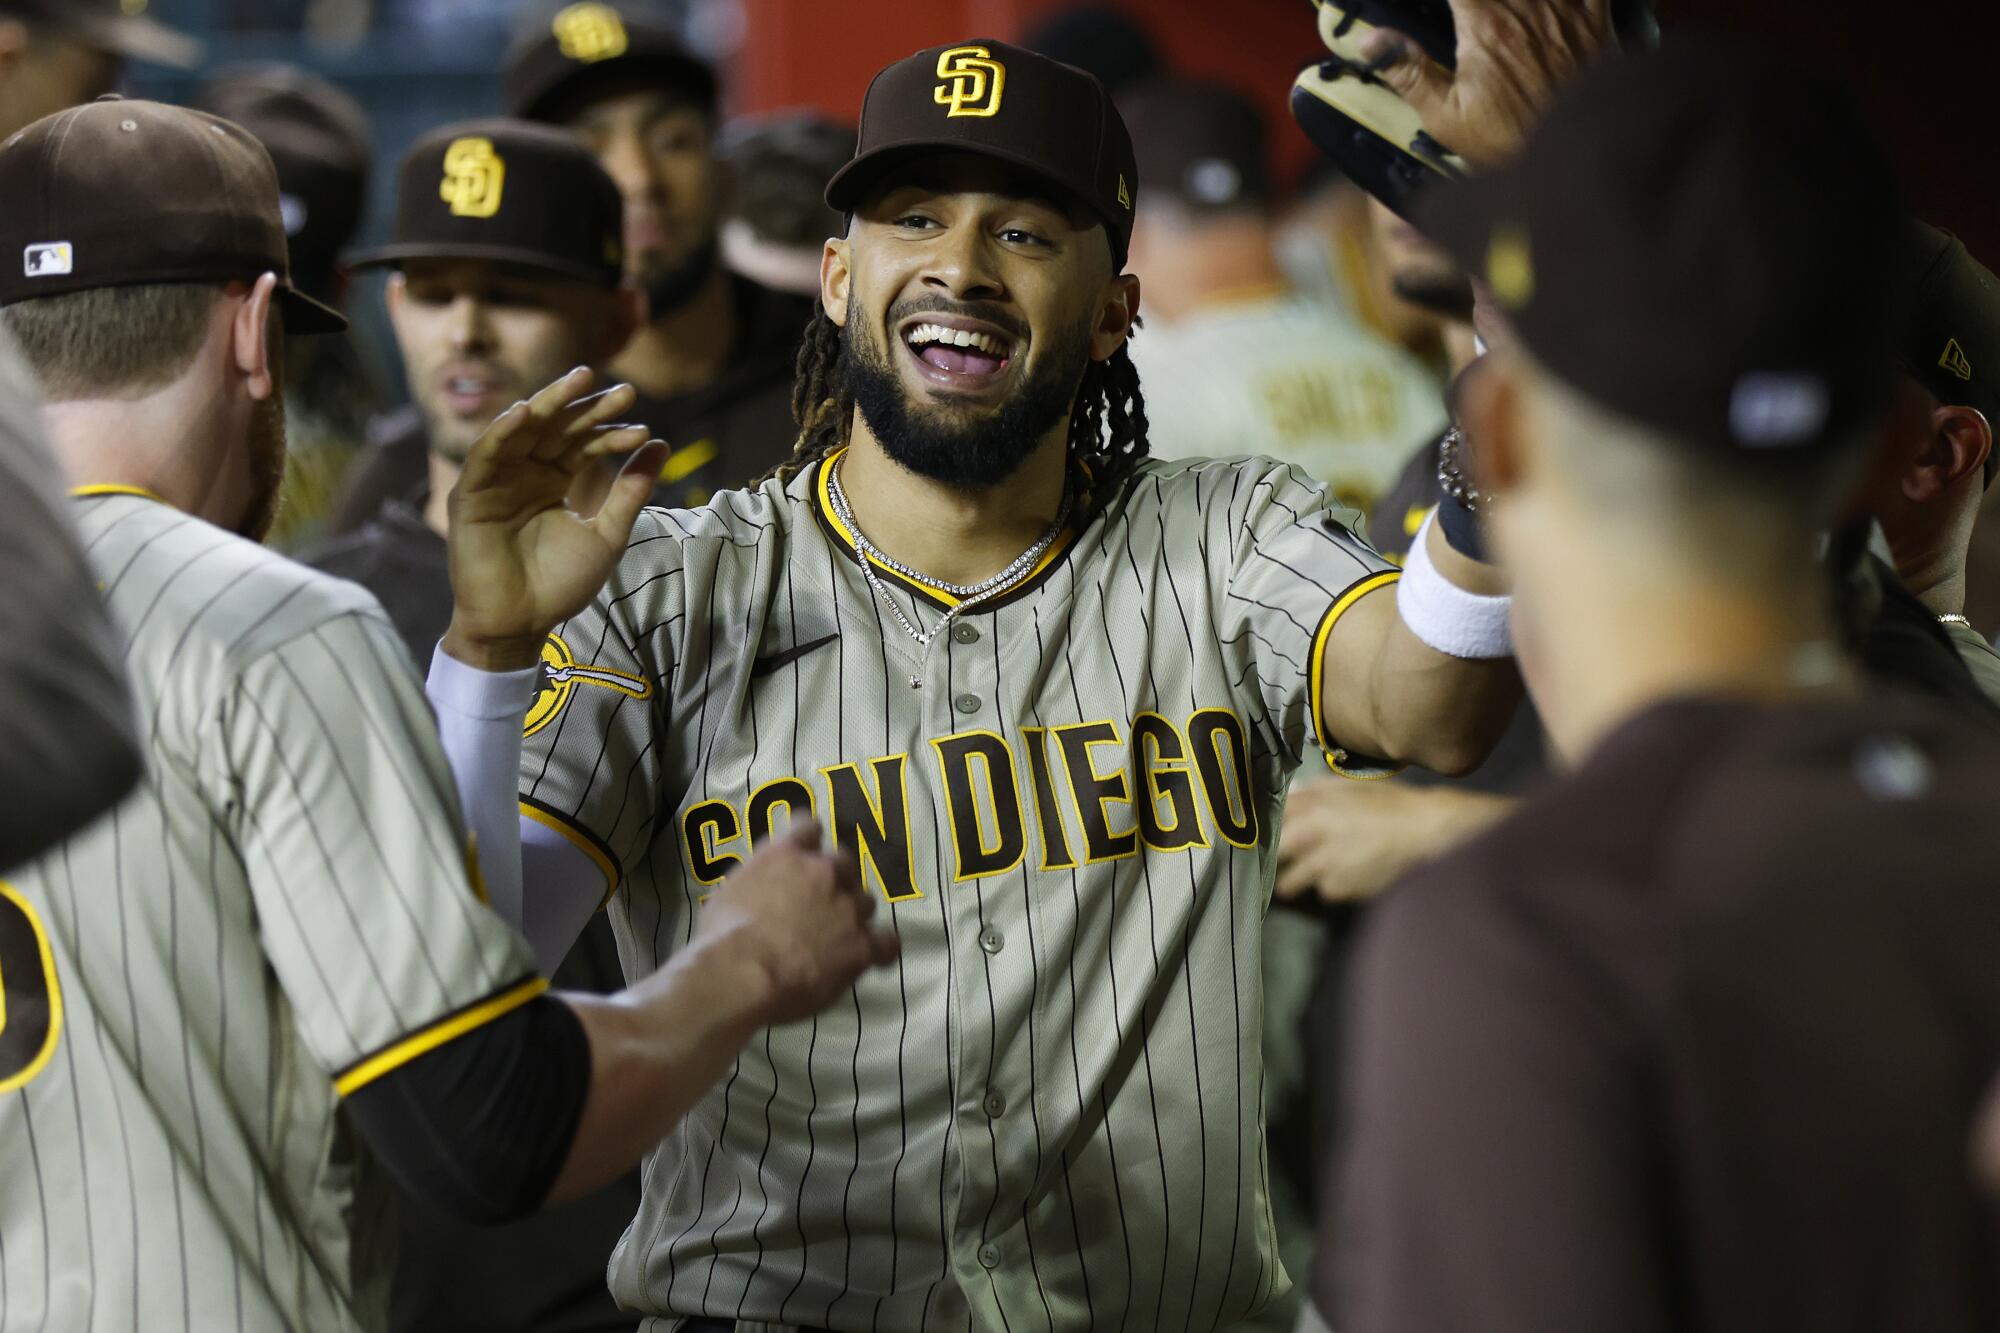 OH SH*T! FERNANDO TATIS JR. OF THE SAN DIEGO PADRES IS OFFICIALLY BACK!!  WILL HE BE THE SAME GUY? 